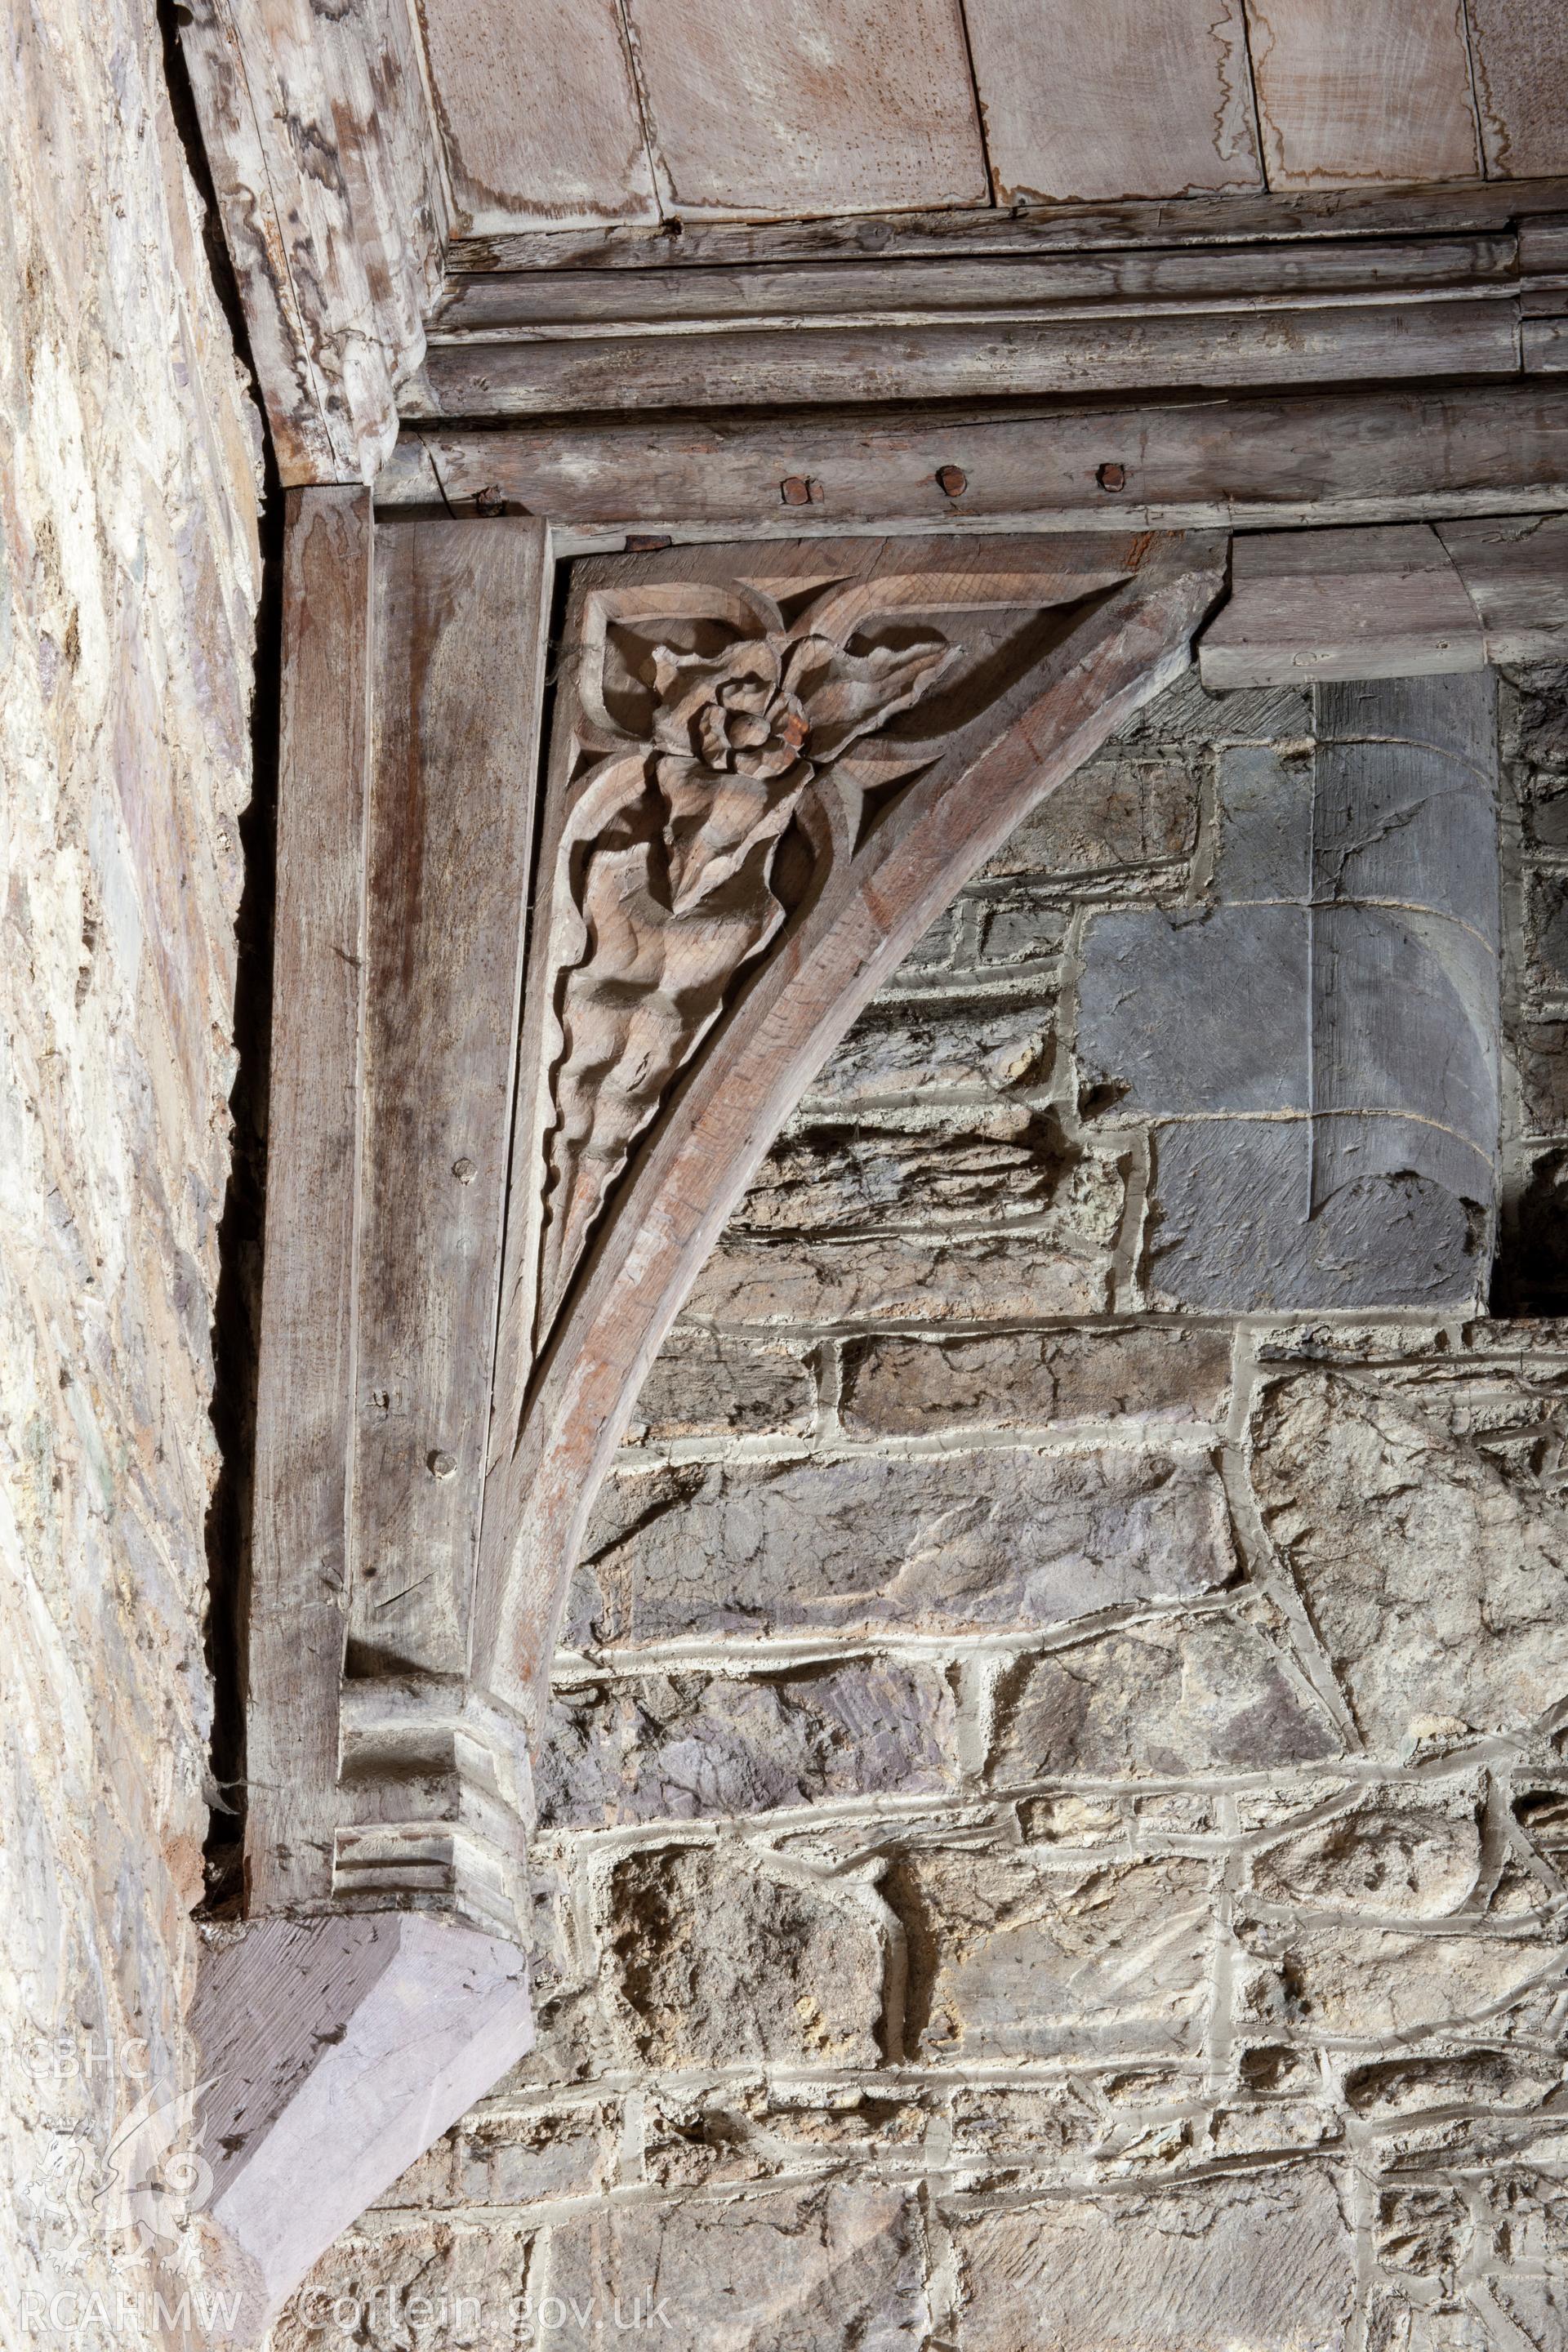 Spandrels in south aisle, north side, in sequence from the east